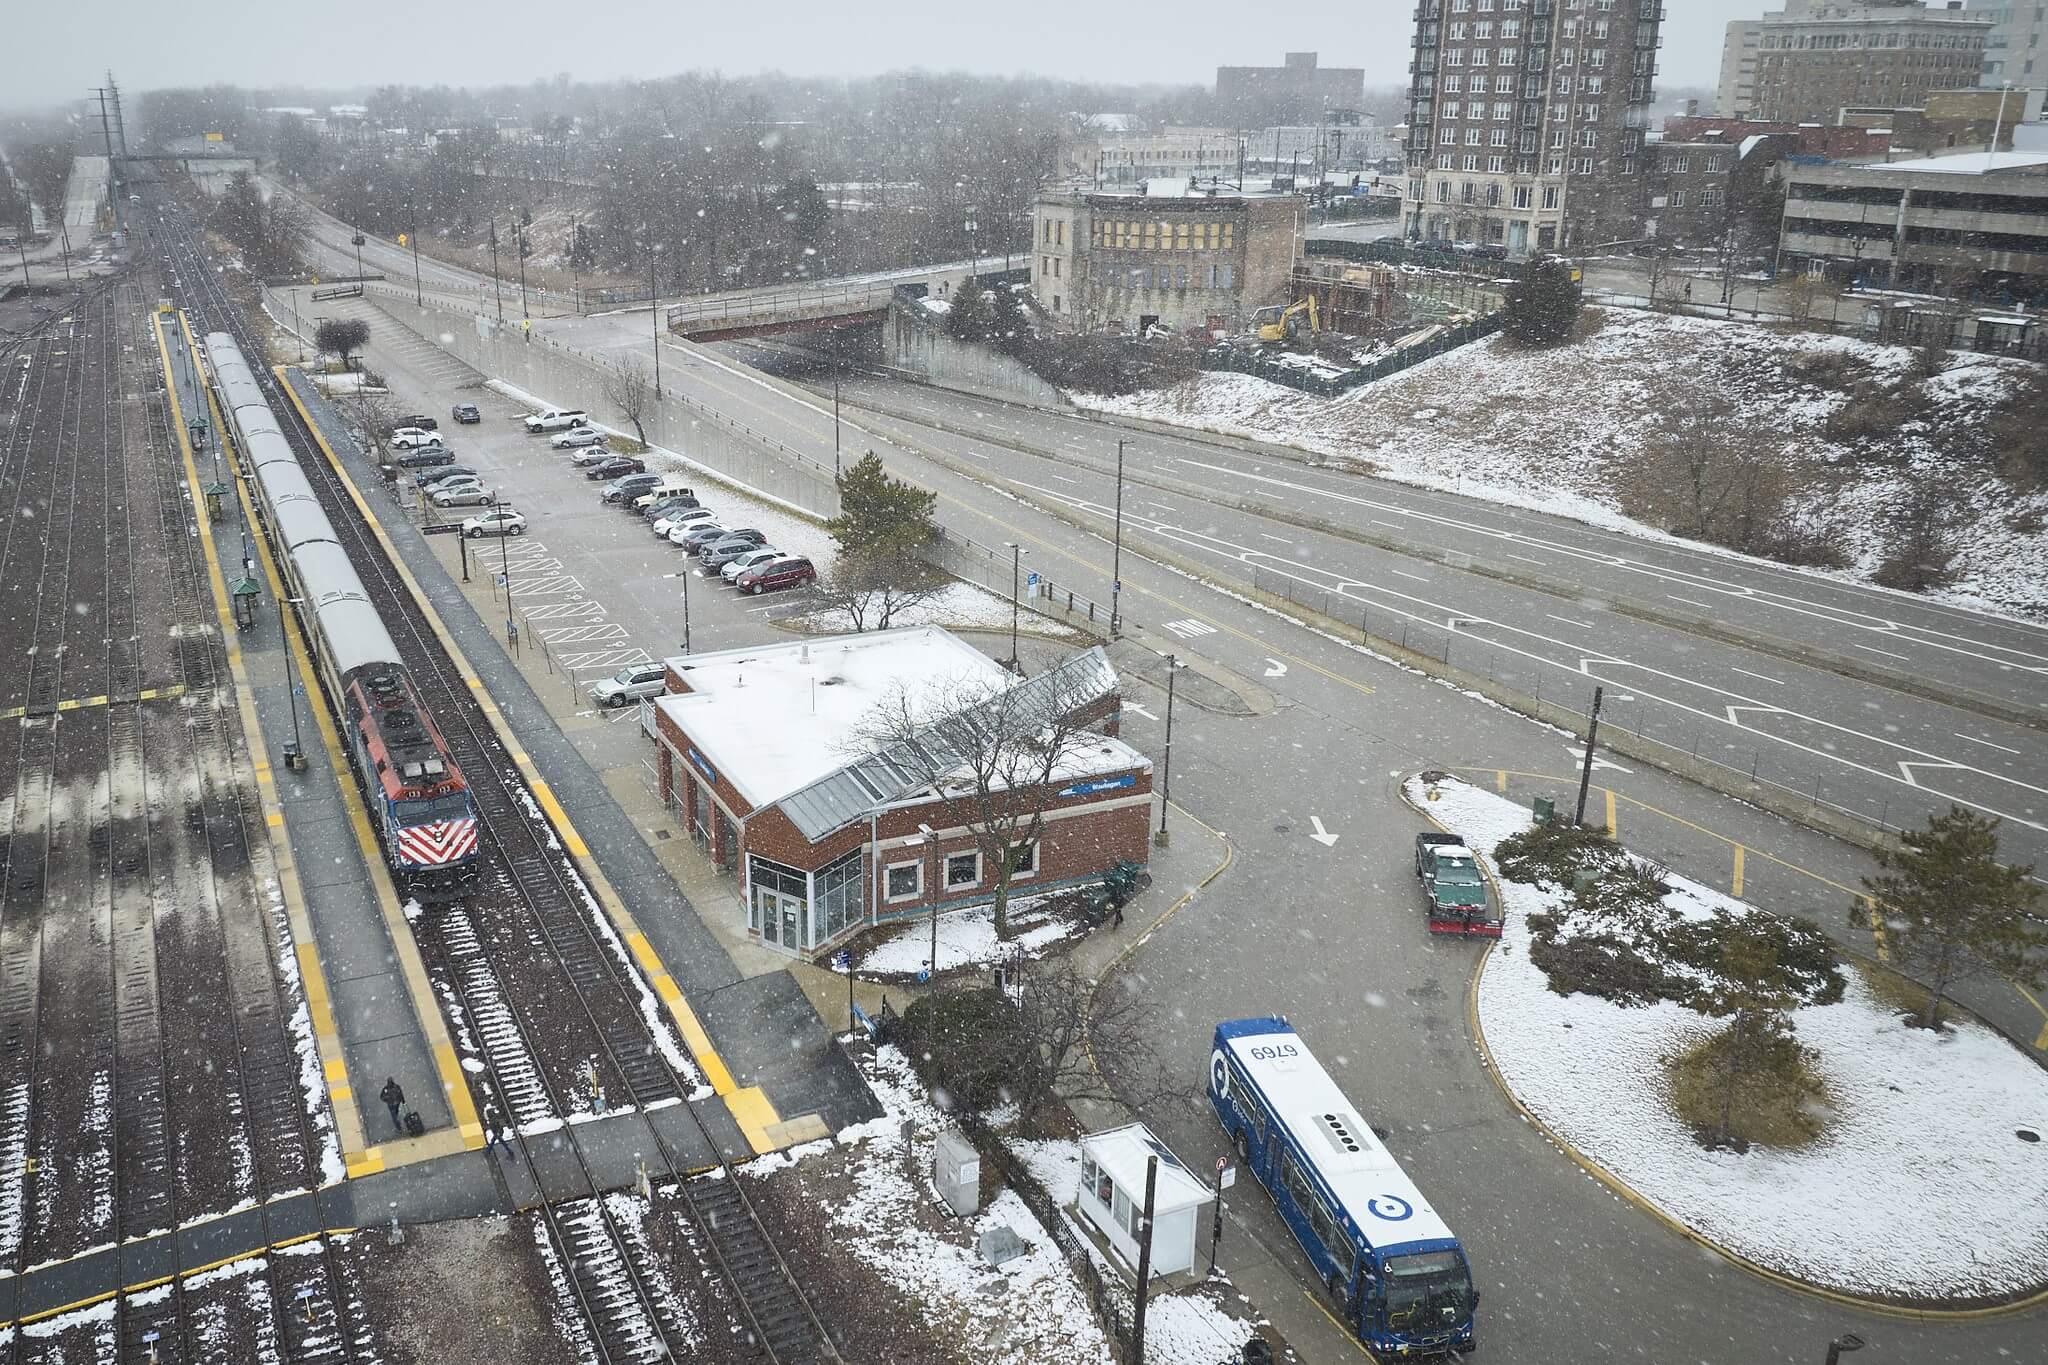 Aerial view of snow falling on train station. Metra train on tracks, Pace bus at bus stop. Truck with snow plow attachment.